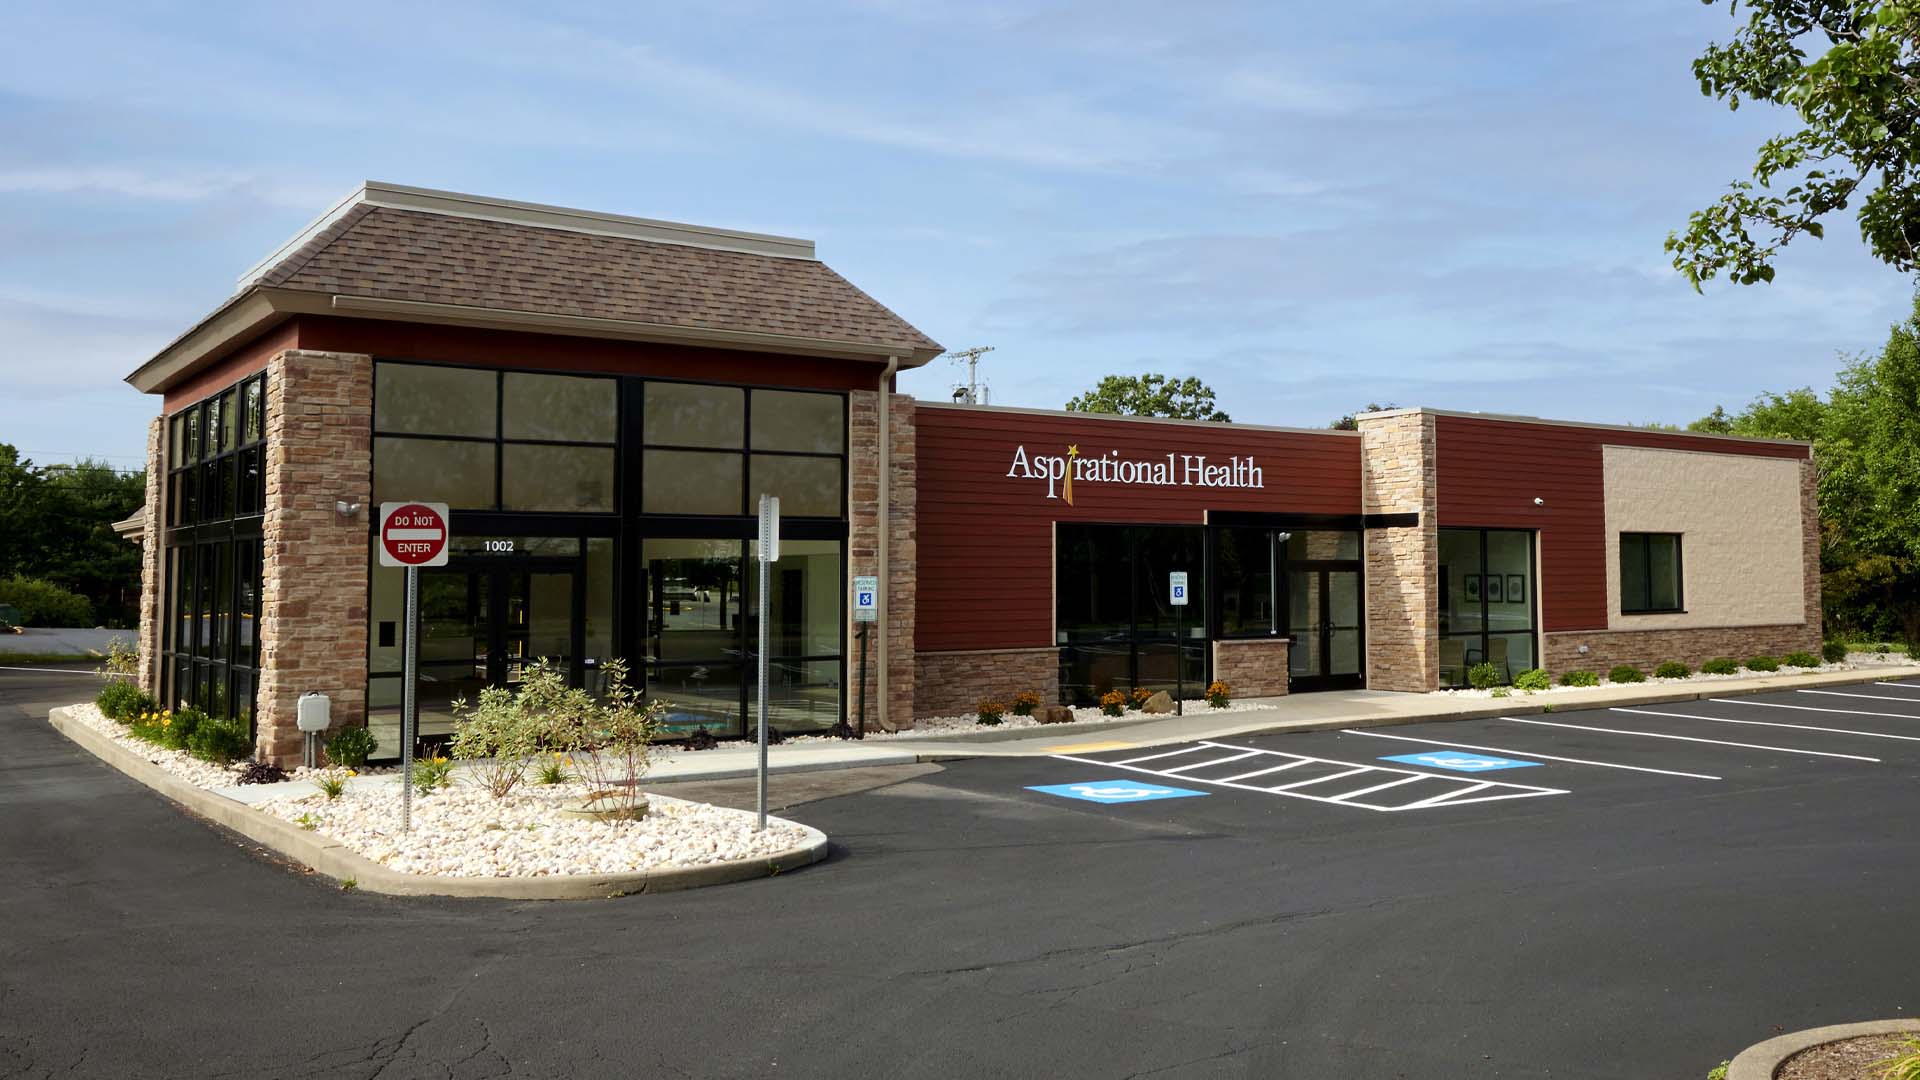 Primary Care Office in Cranberry, PA